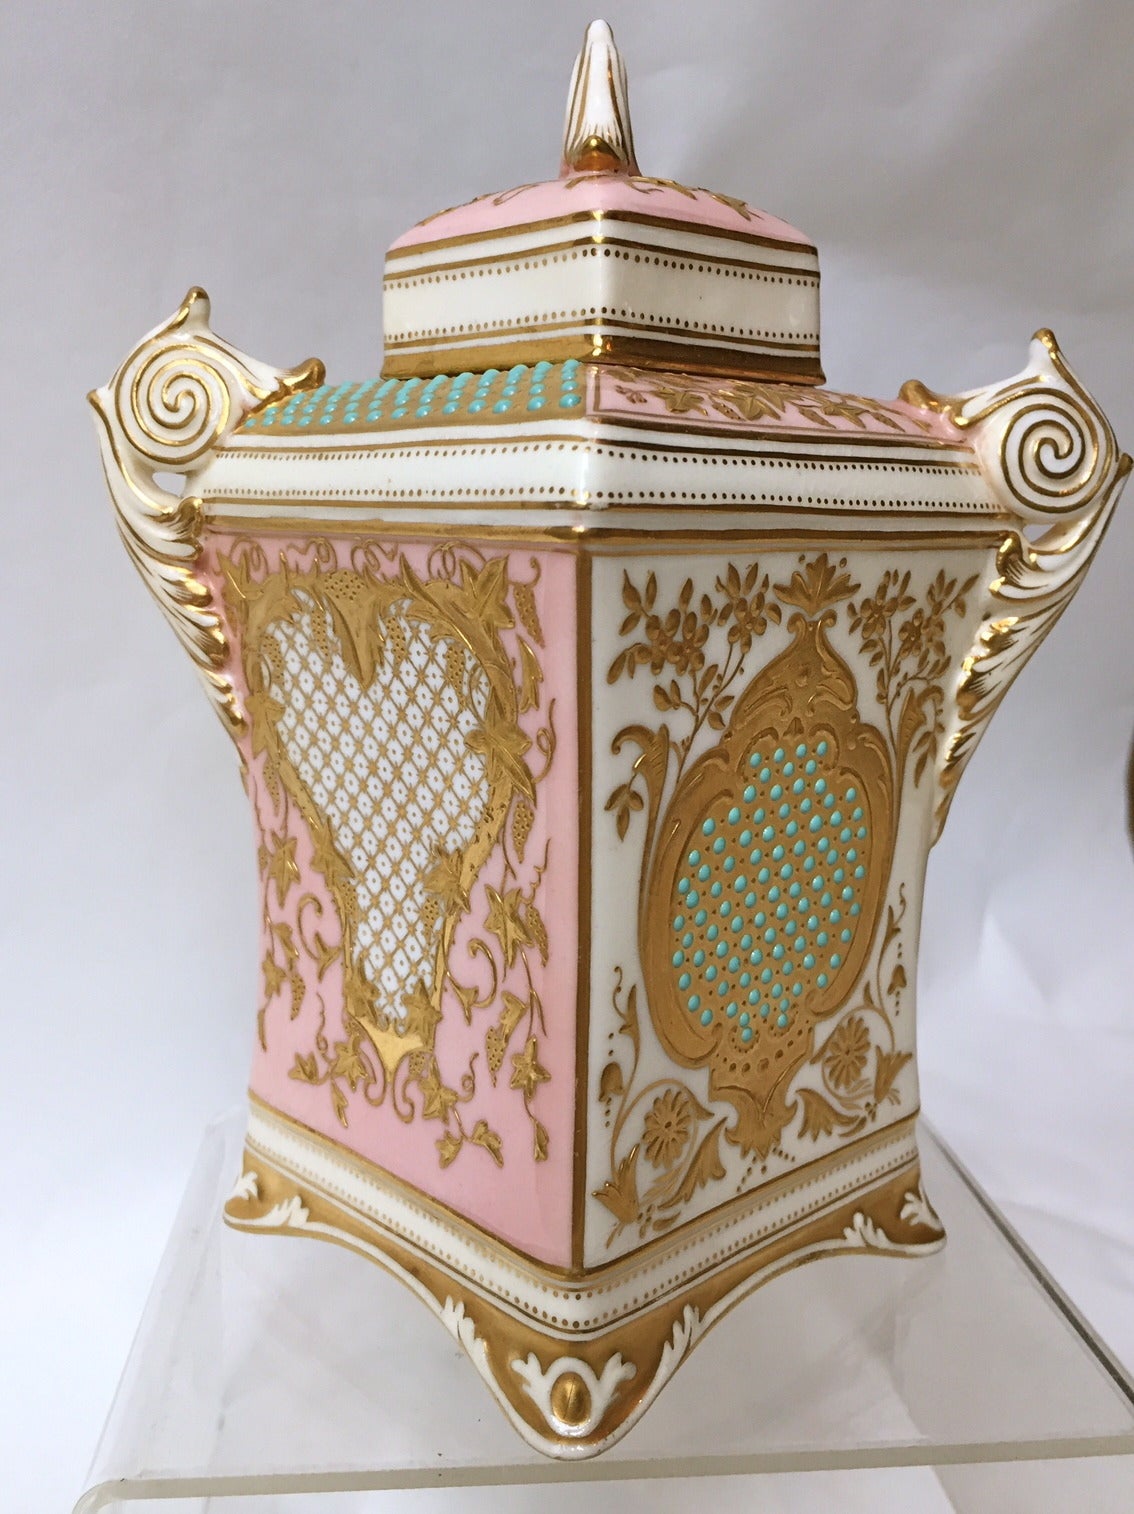 The last one of these we had for offer was about fifteen years ago, they are rare. Beautifully gilded and Jewelled in the famous dot pattern. So unusual is
the shape, this example is retaining its original cover and also the often lacking
Inner